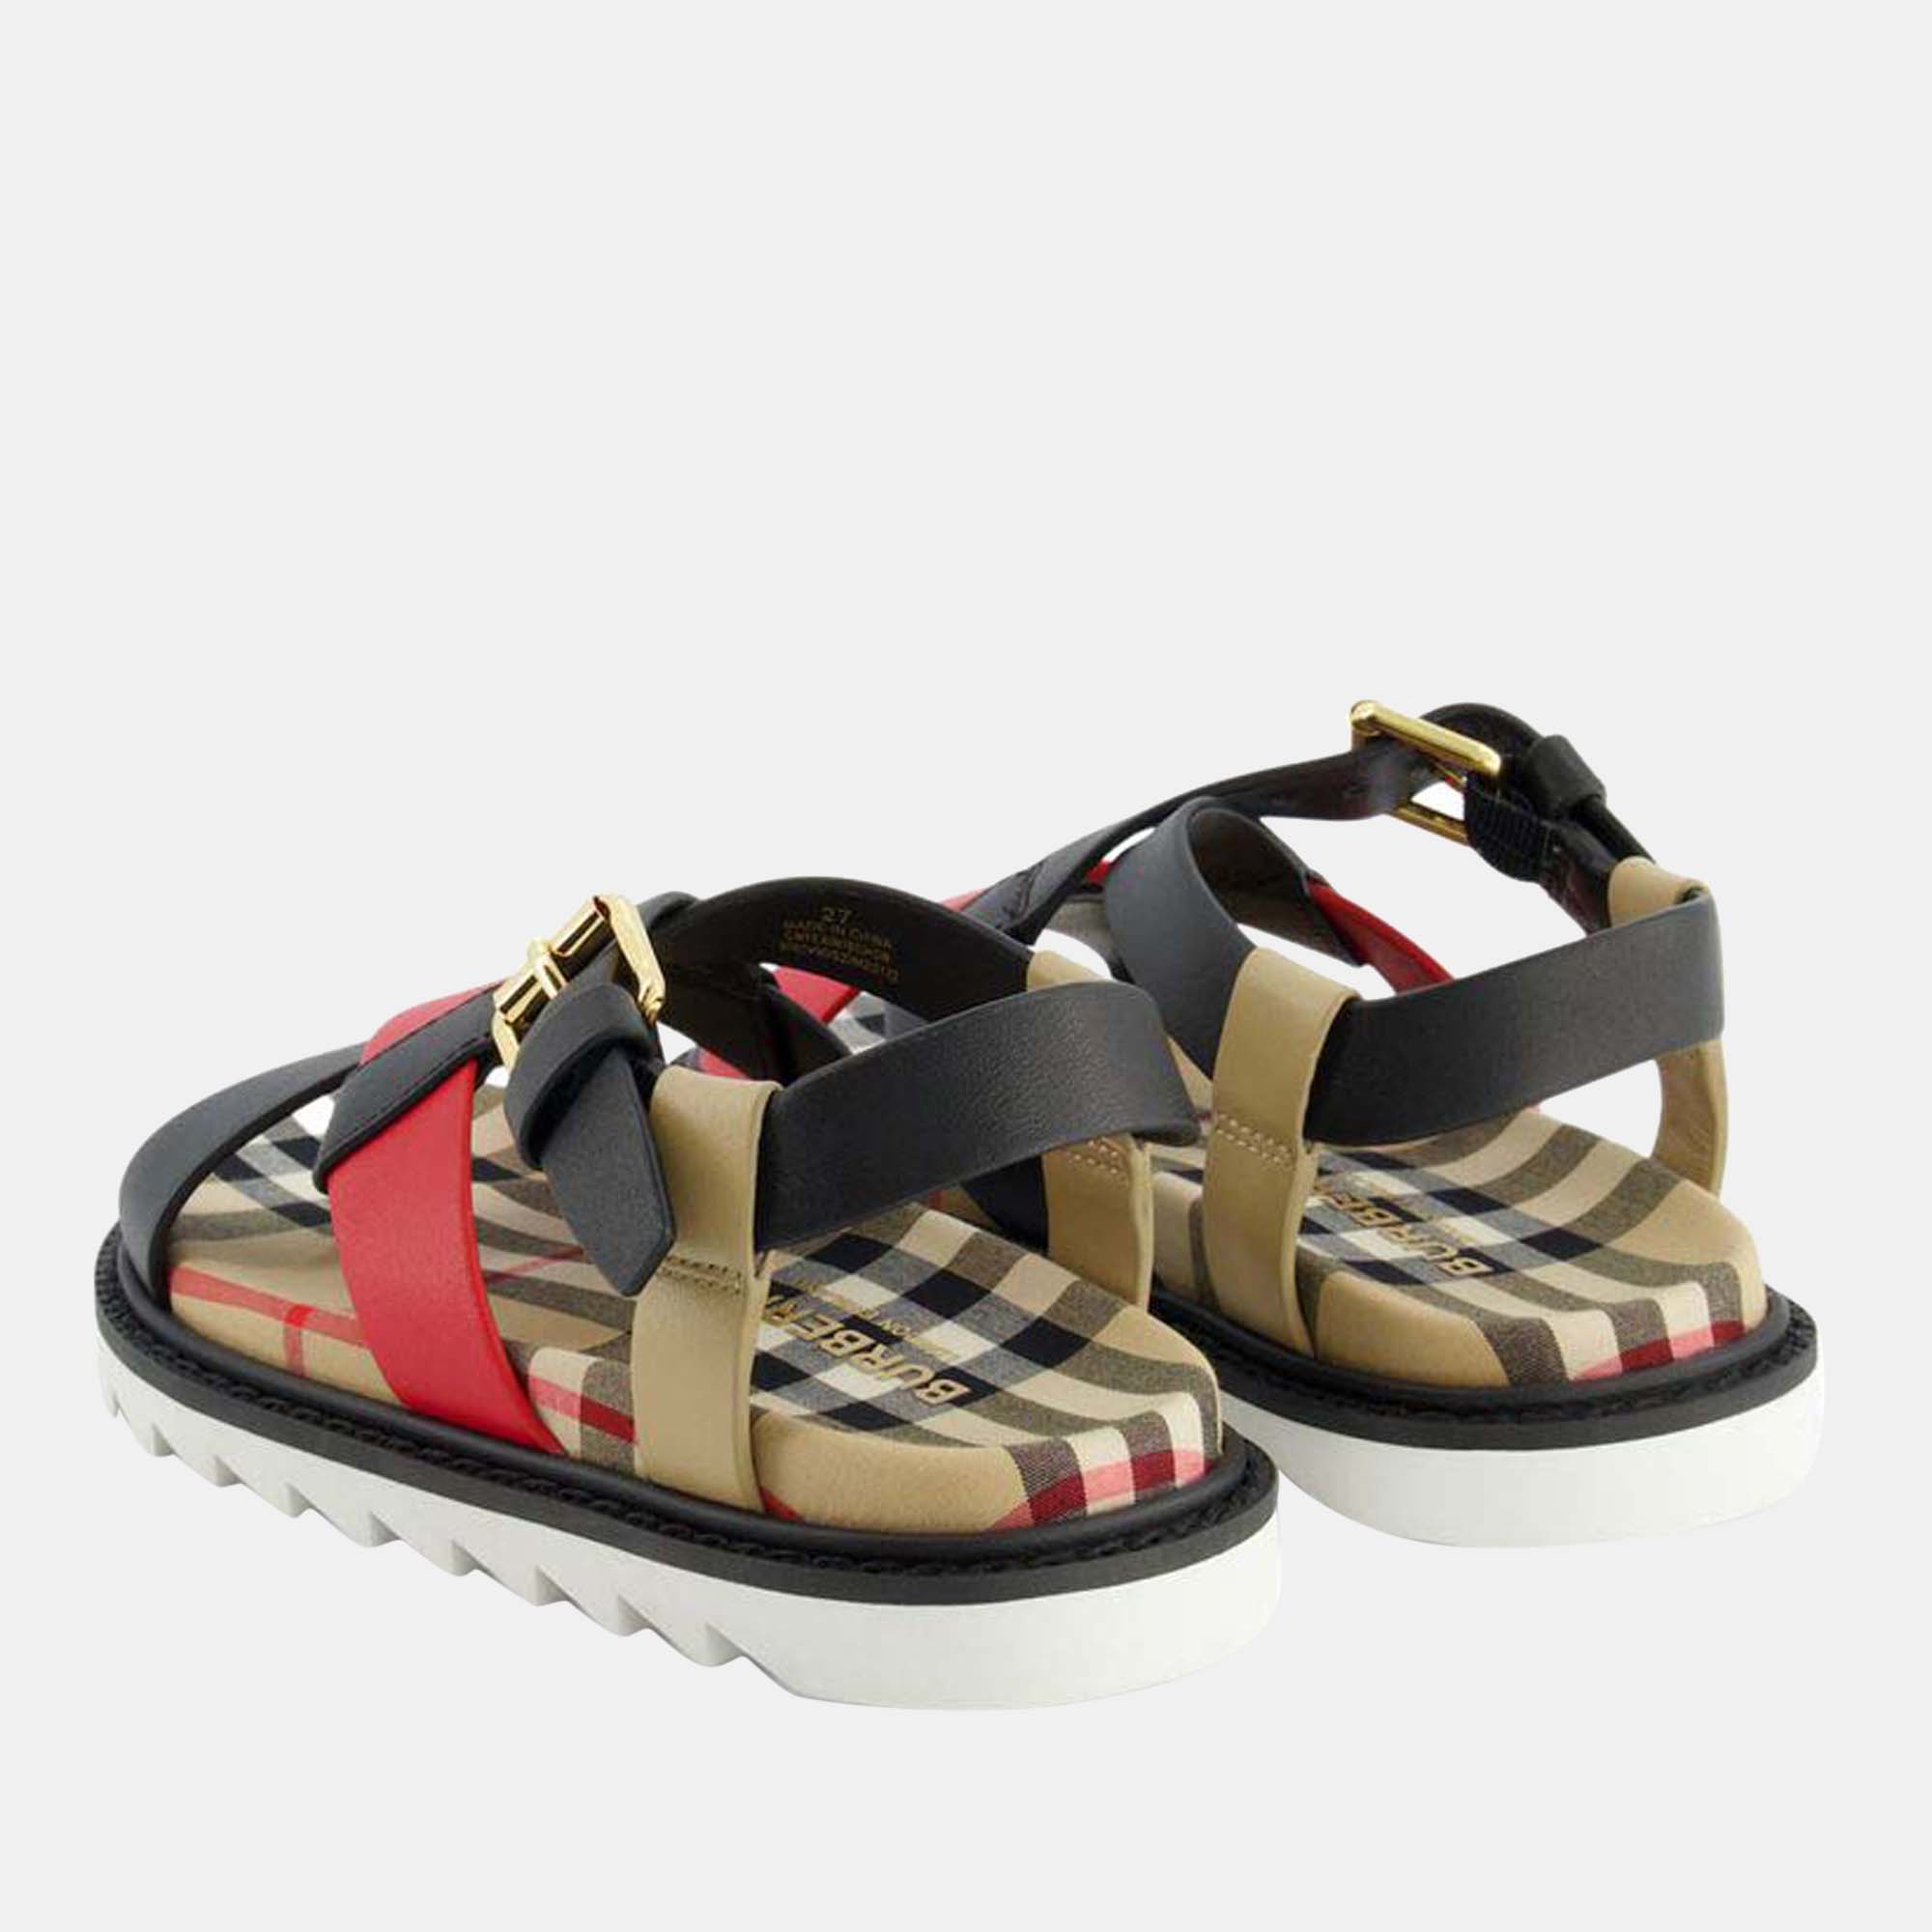 Buberry (Kids) Black/Red Multicolor - Leather - Jane Check-Print Strappy Sandals EU 29